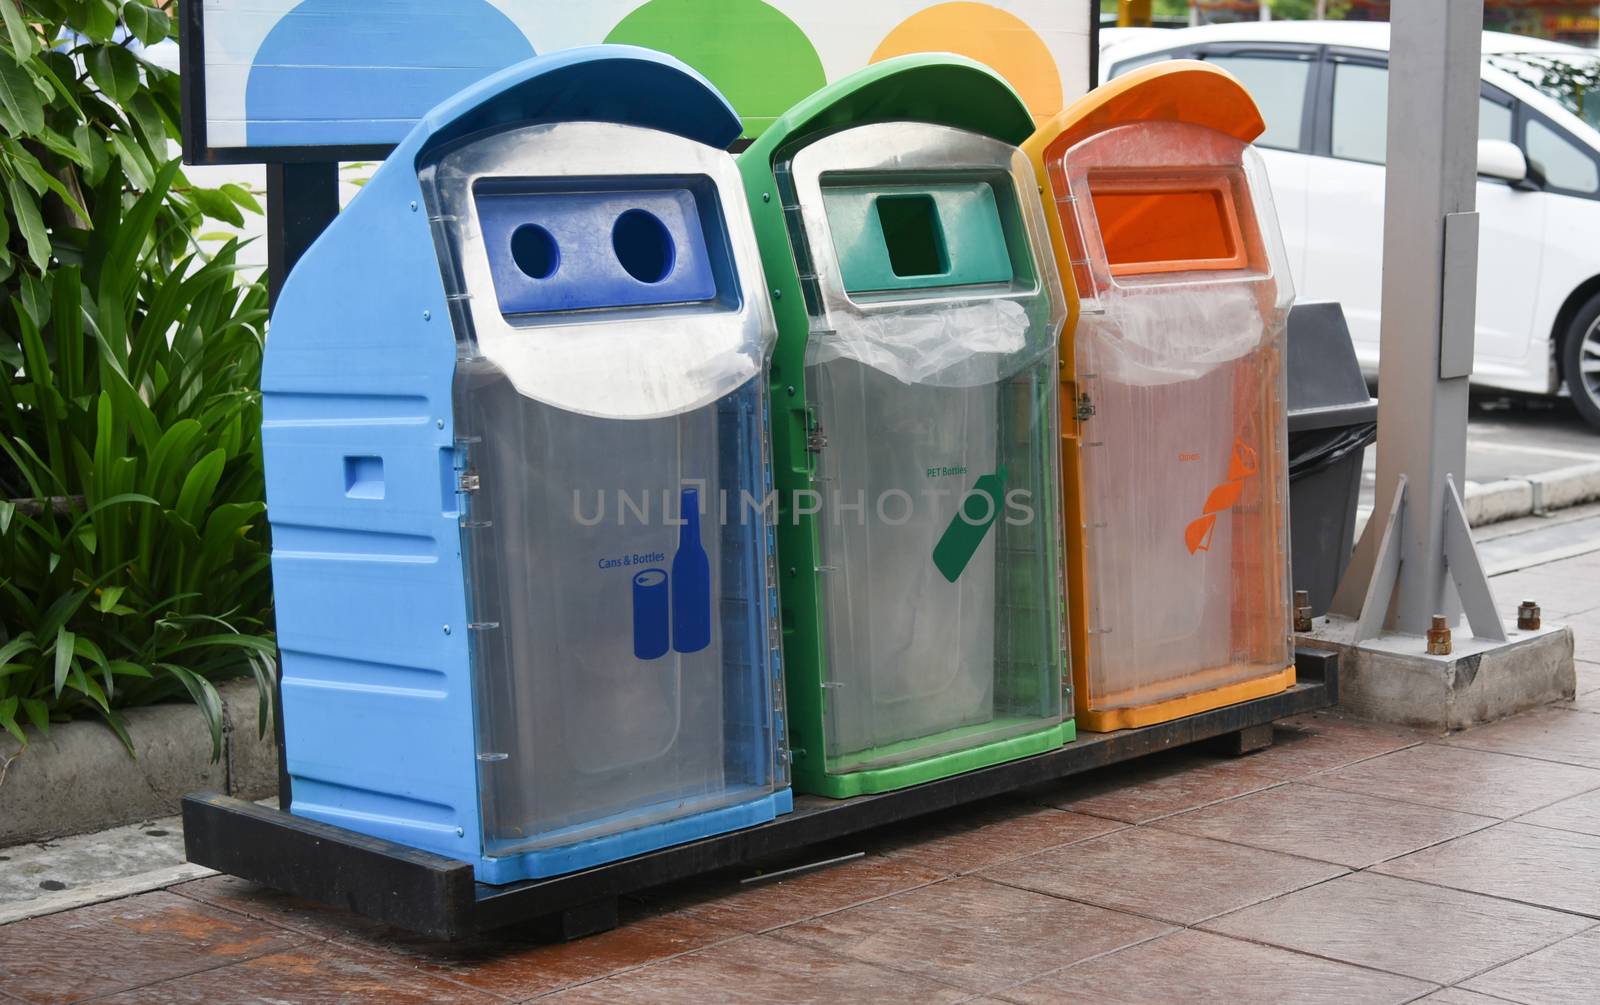 Recycle bin to separate waste before disposing. by photobyphotoboy